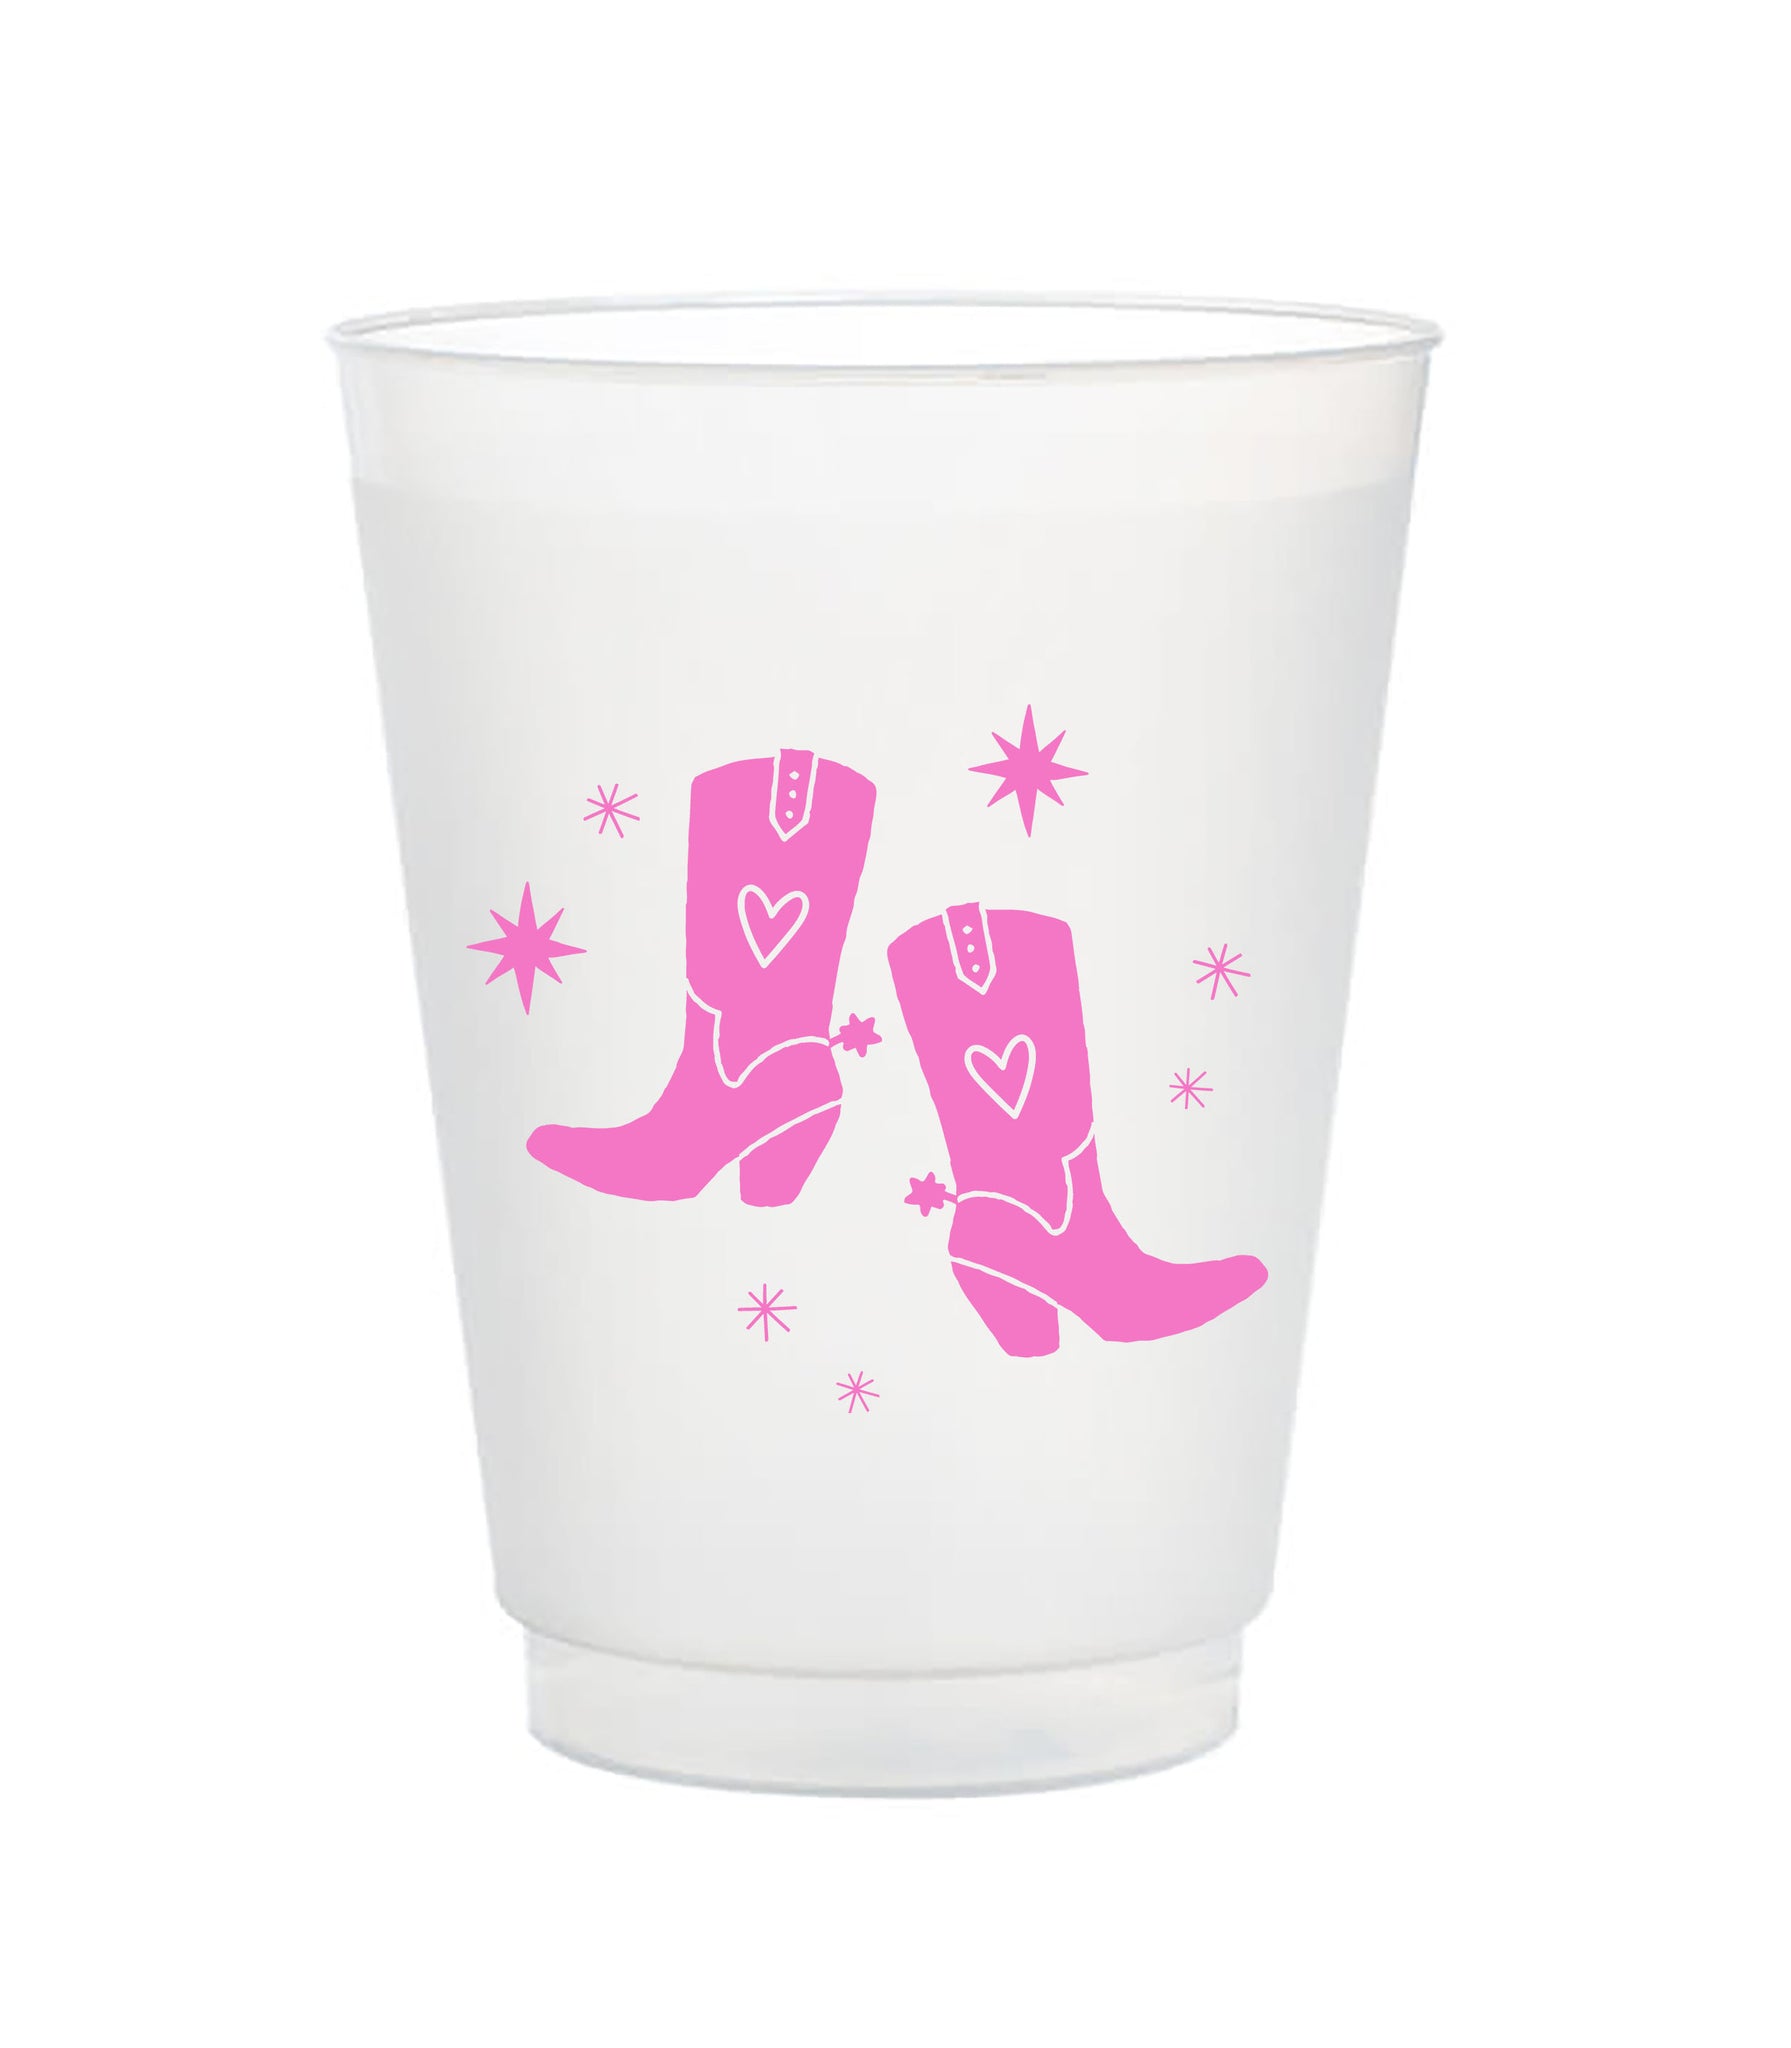 Cheers Cups, Cheap Plastic Cups, Country Wedding Cups, Cowboy Boots,  Stadium Cups 11 